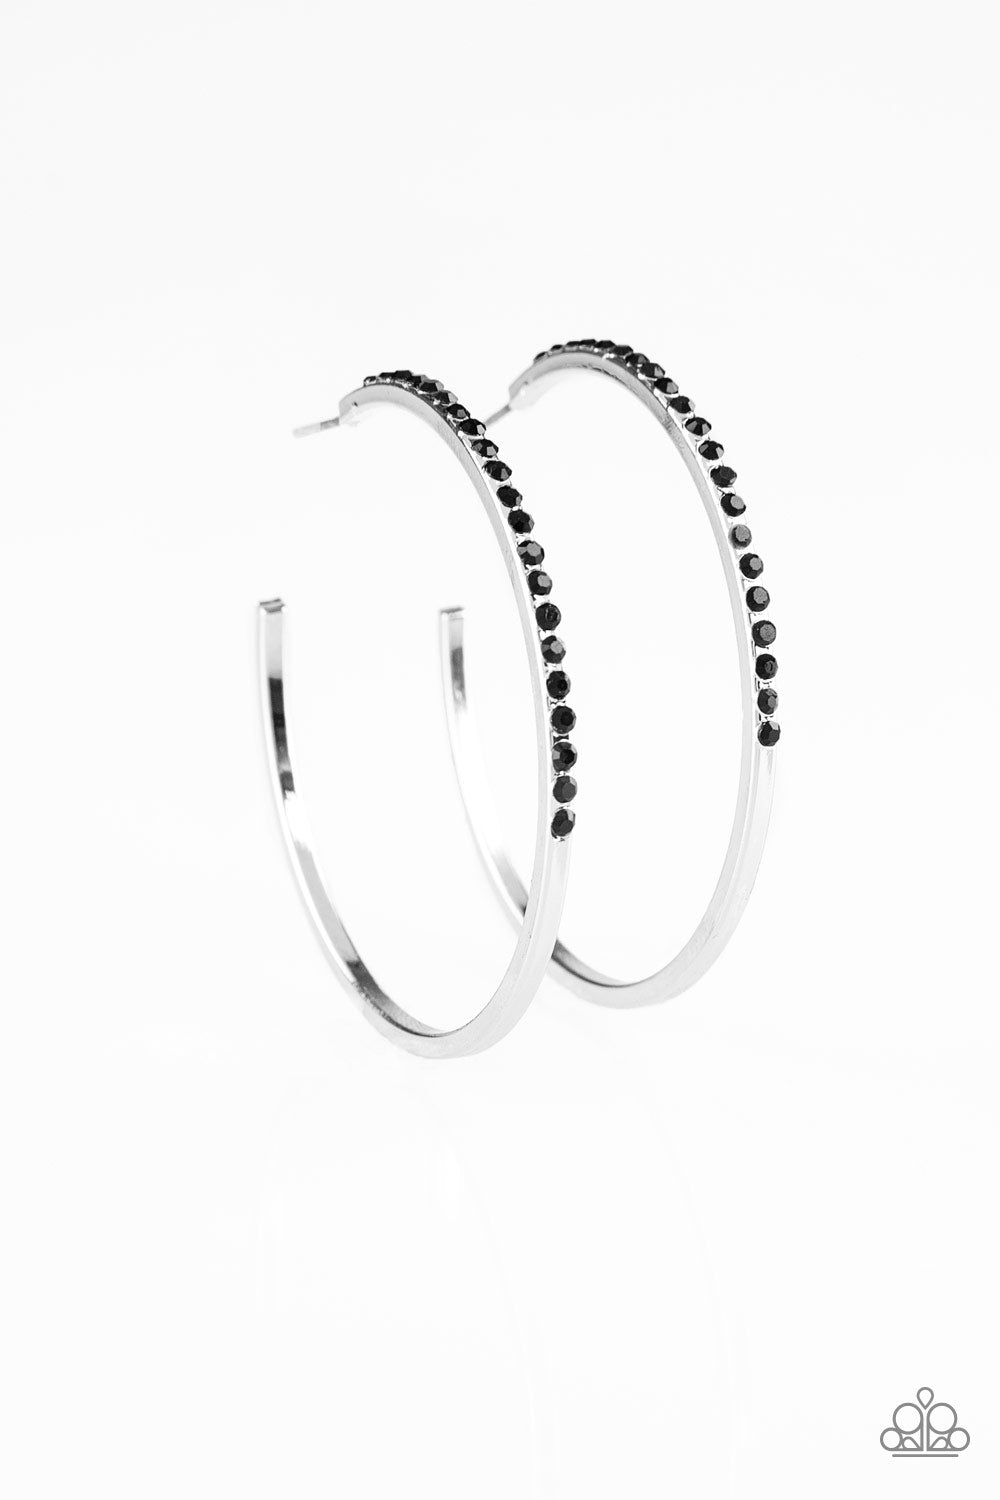 Chic Classic - Black Item #E350 The front of a silver hoop is encrusted in glittery black rhinestones for a glamorous look. Earring attaches to a standard post fitting. Hoop measures 2" in diameter. All Paparazzi Accessories are lead free and nickel free!  Sold as one pair of hoop earrings.